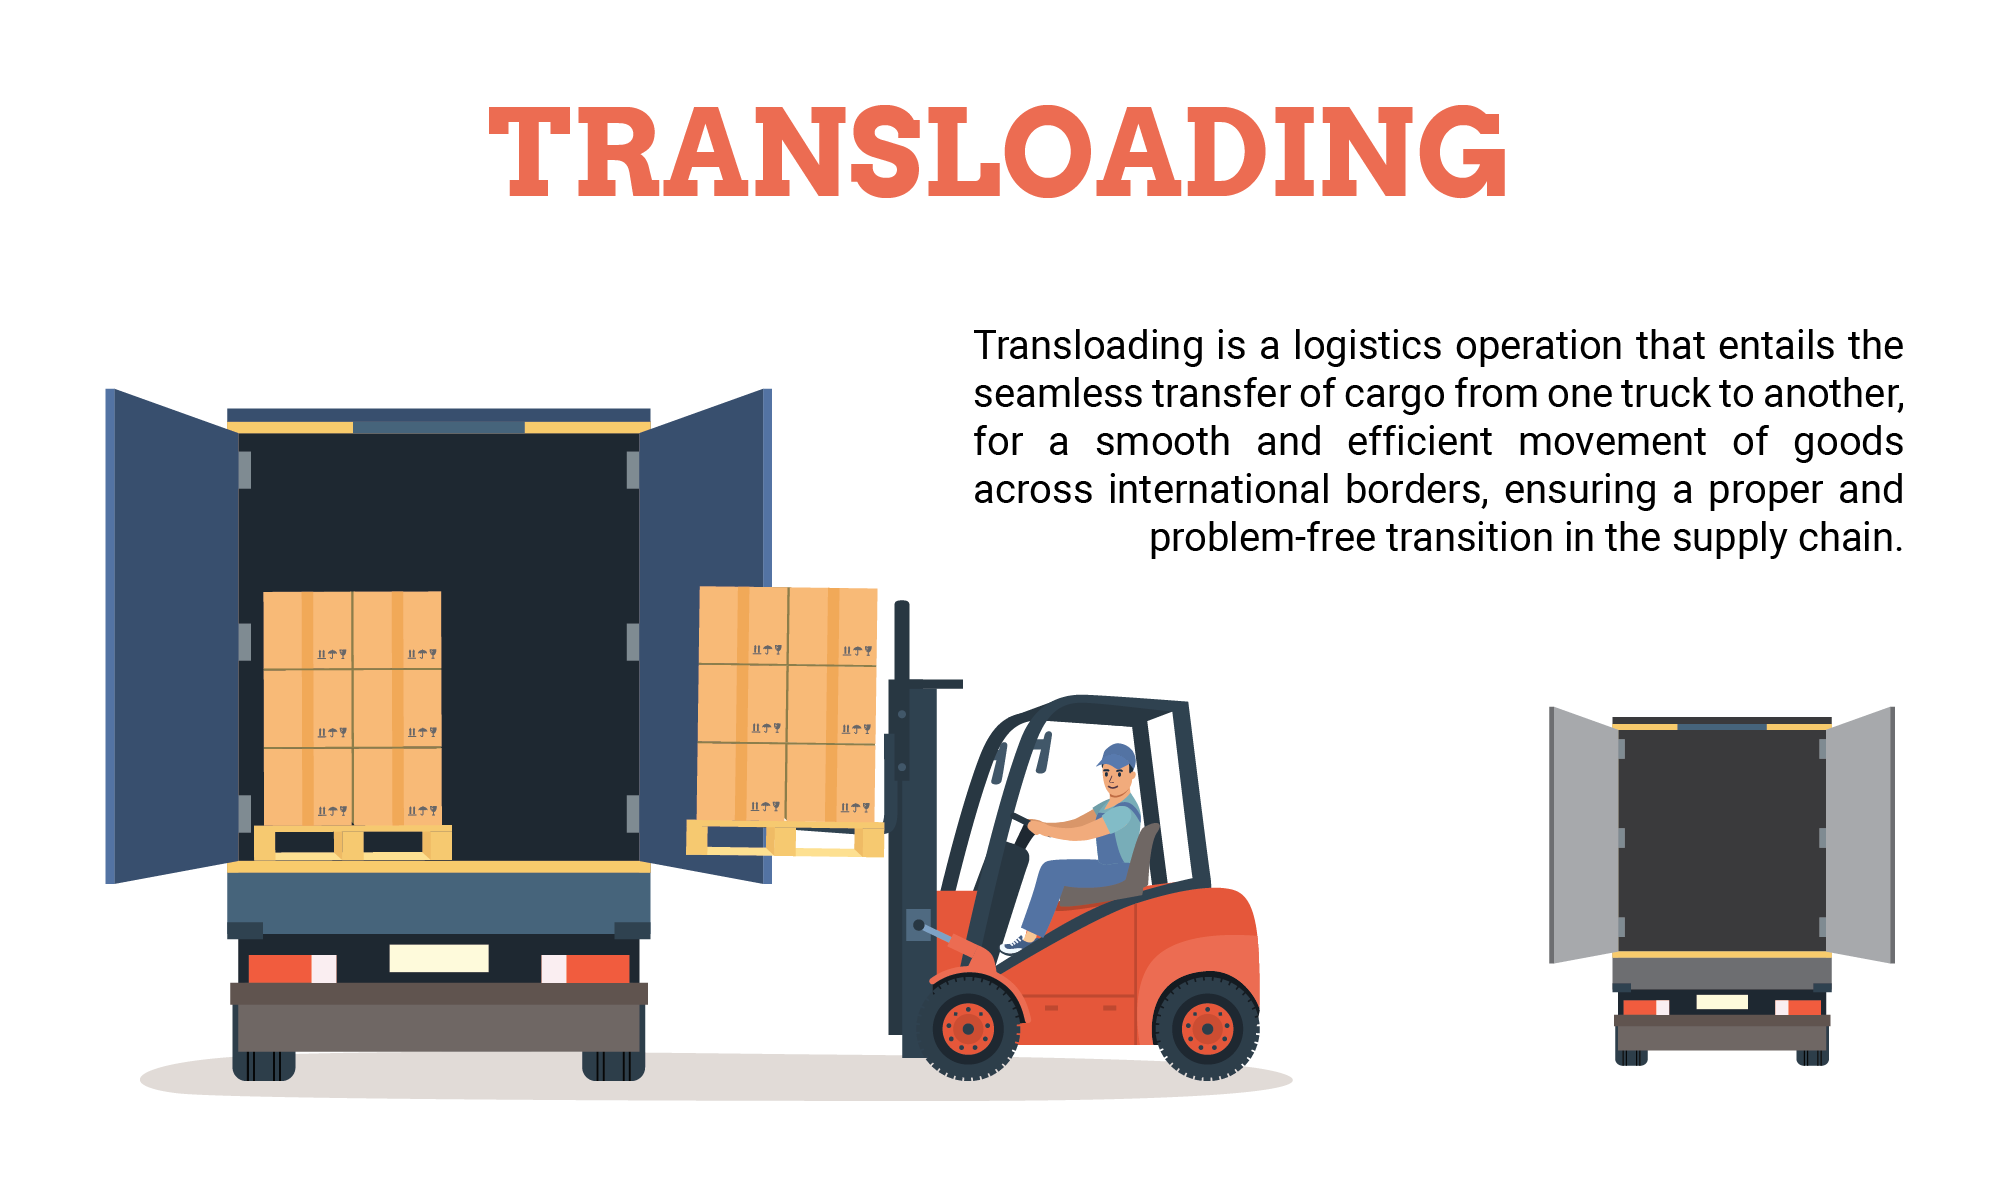 definition of transloading and how it works in cross border trucking